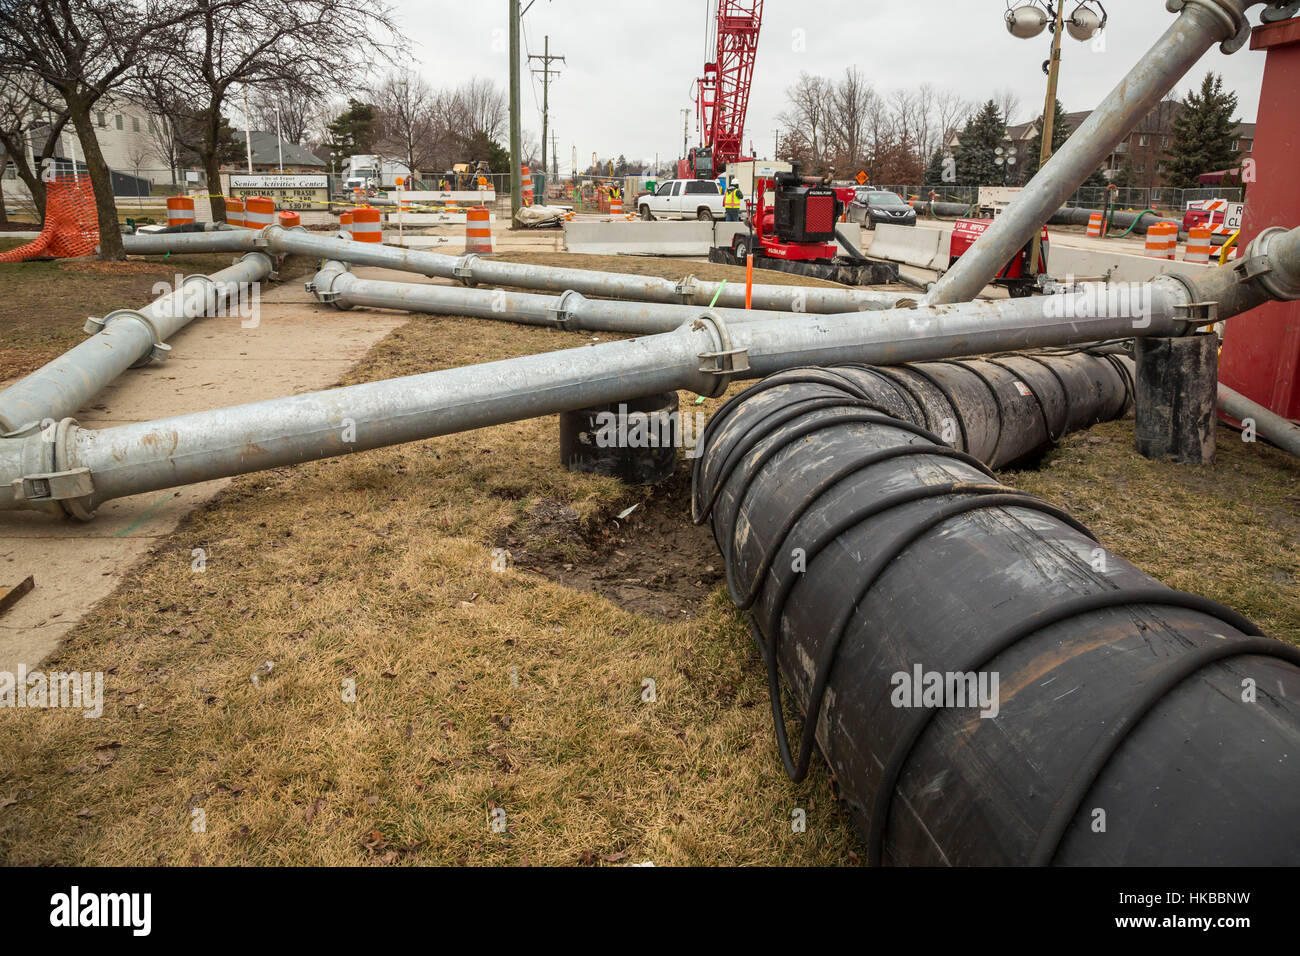 Fraser, USA. 27th January, 2017. The collapse of an 11-foot-wide underground sewer line threatens environmental problems for 11 communities in suburban Detroit. The collapse created a sinkhole that destroyed three houses. Officials estimate that repairing the sewer line could cost $100 million. Until the line is fixed, they say it may be necessary to divert raw sewage into the Clinton River. Credit: Jim West/Alamy Live News Stock Photo